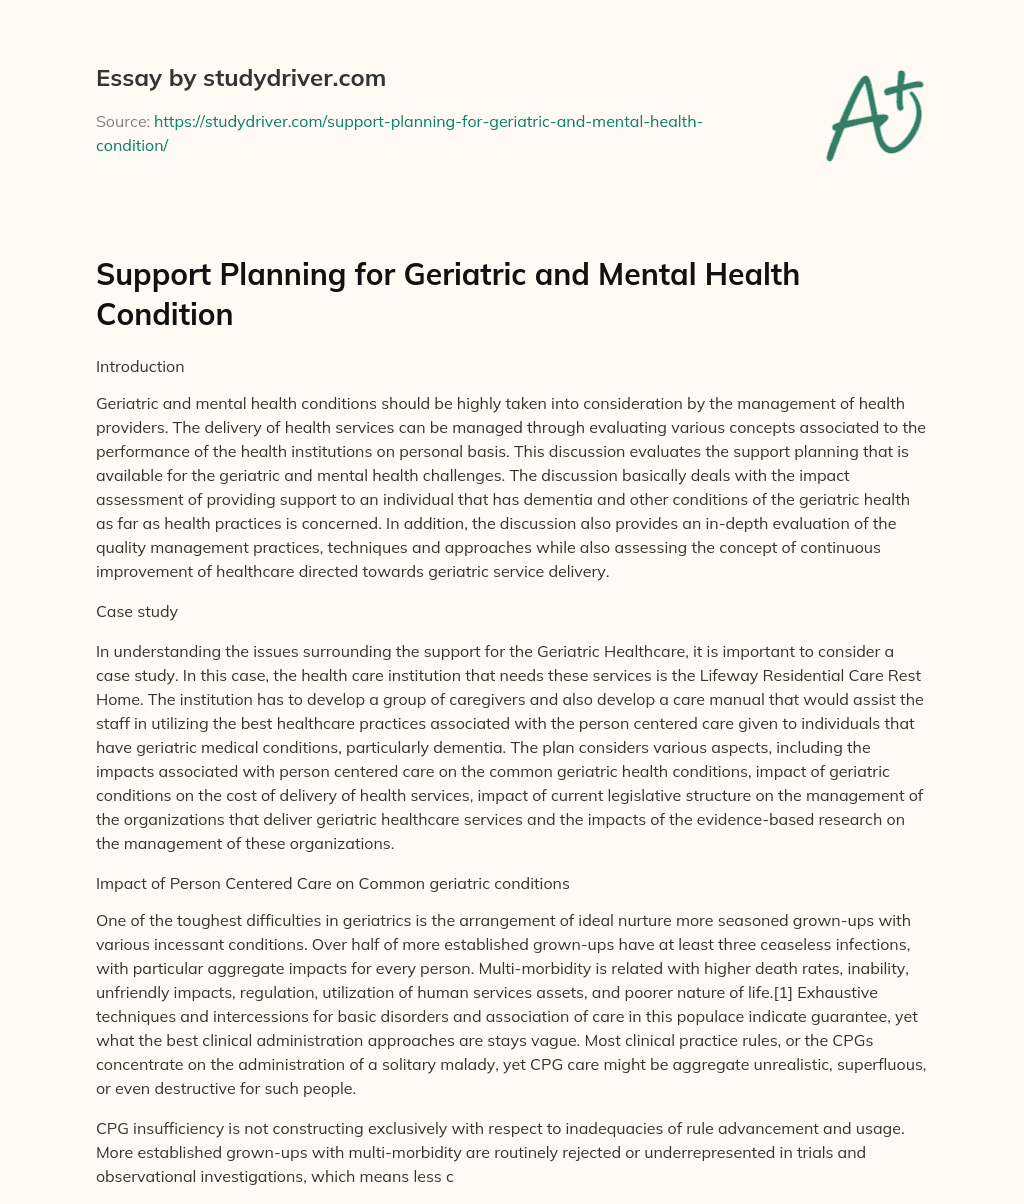 Support Planning for Geriatric and Mental Health Condition essay